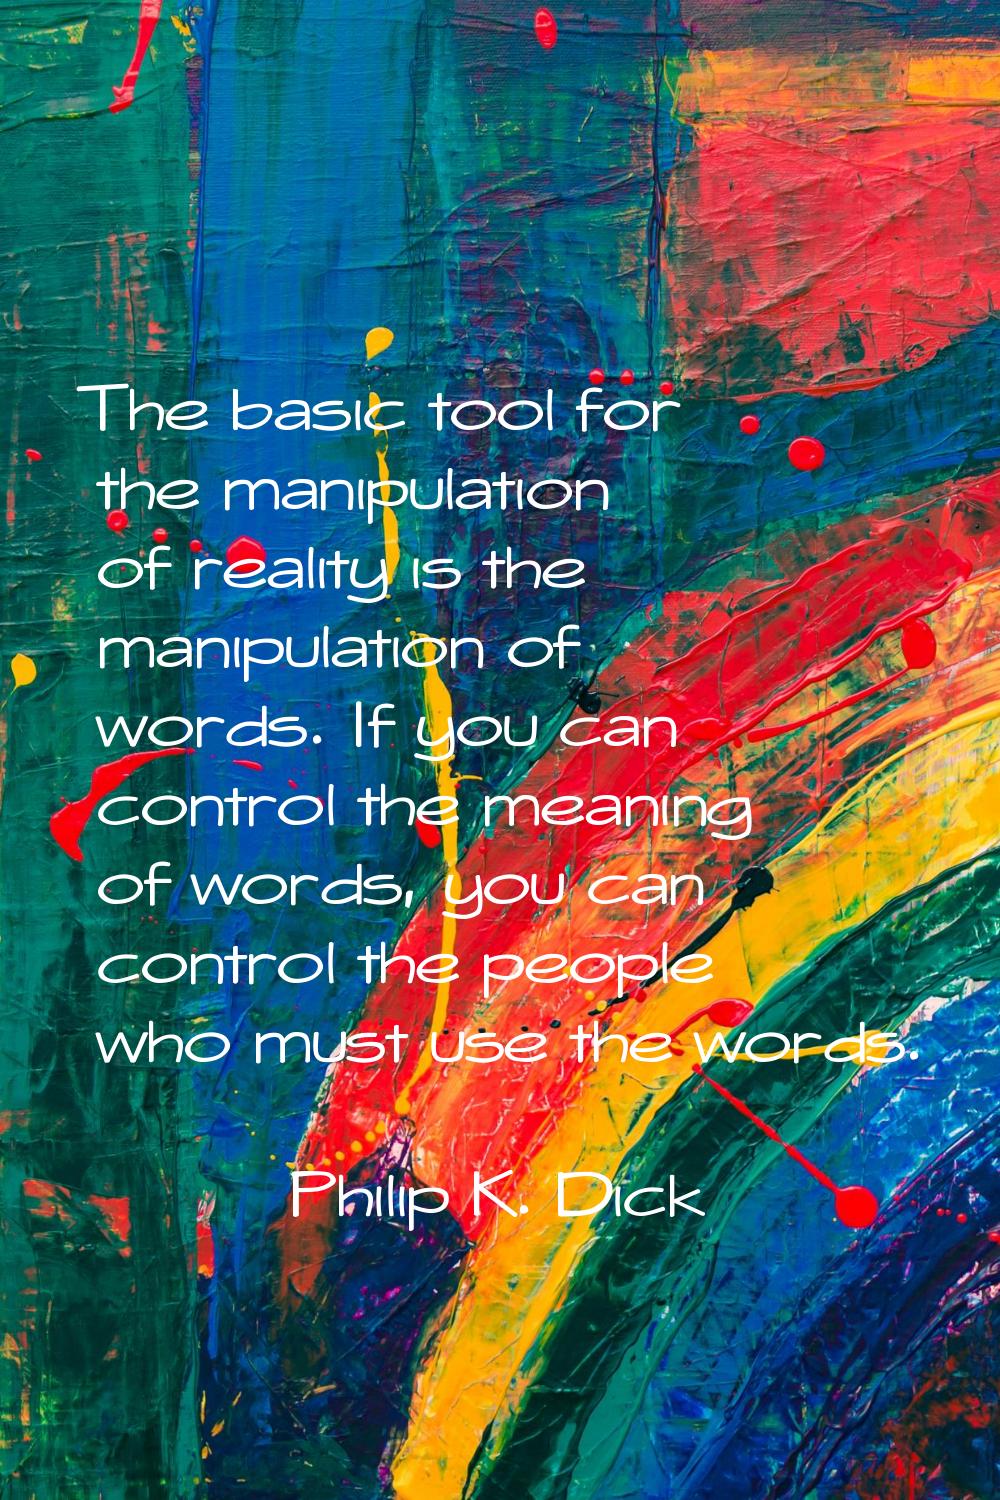 The basic tool for the manipulation of reality is the manipulation of words. If you can control the